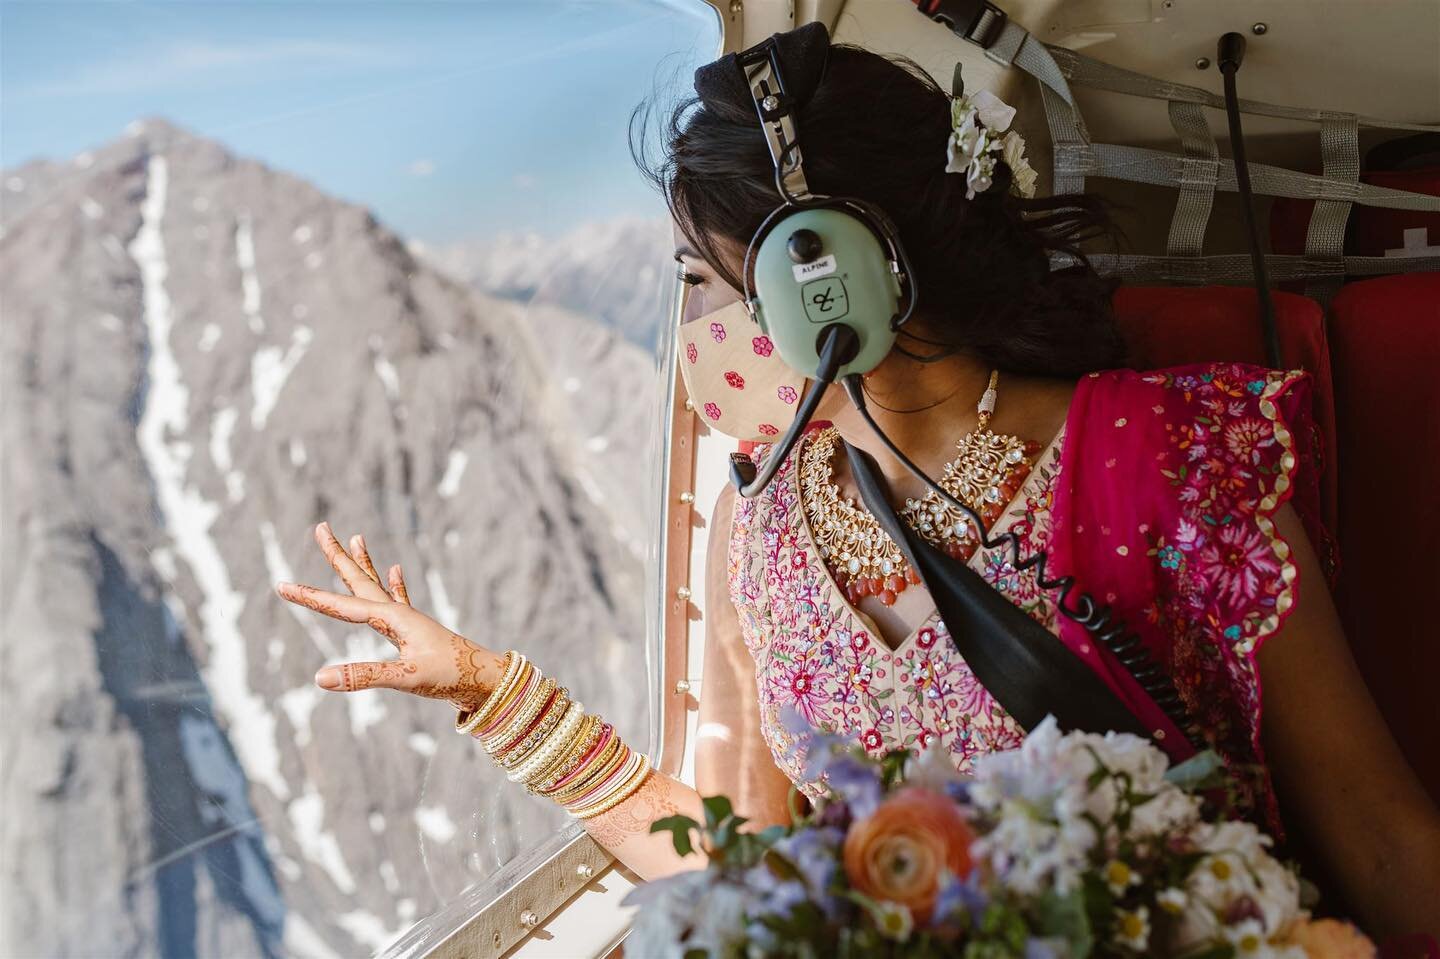 Don&rsquo;t feel like hiking on your wedding day? You don&rsquo;t have to! 🚁